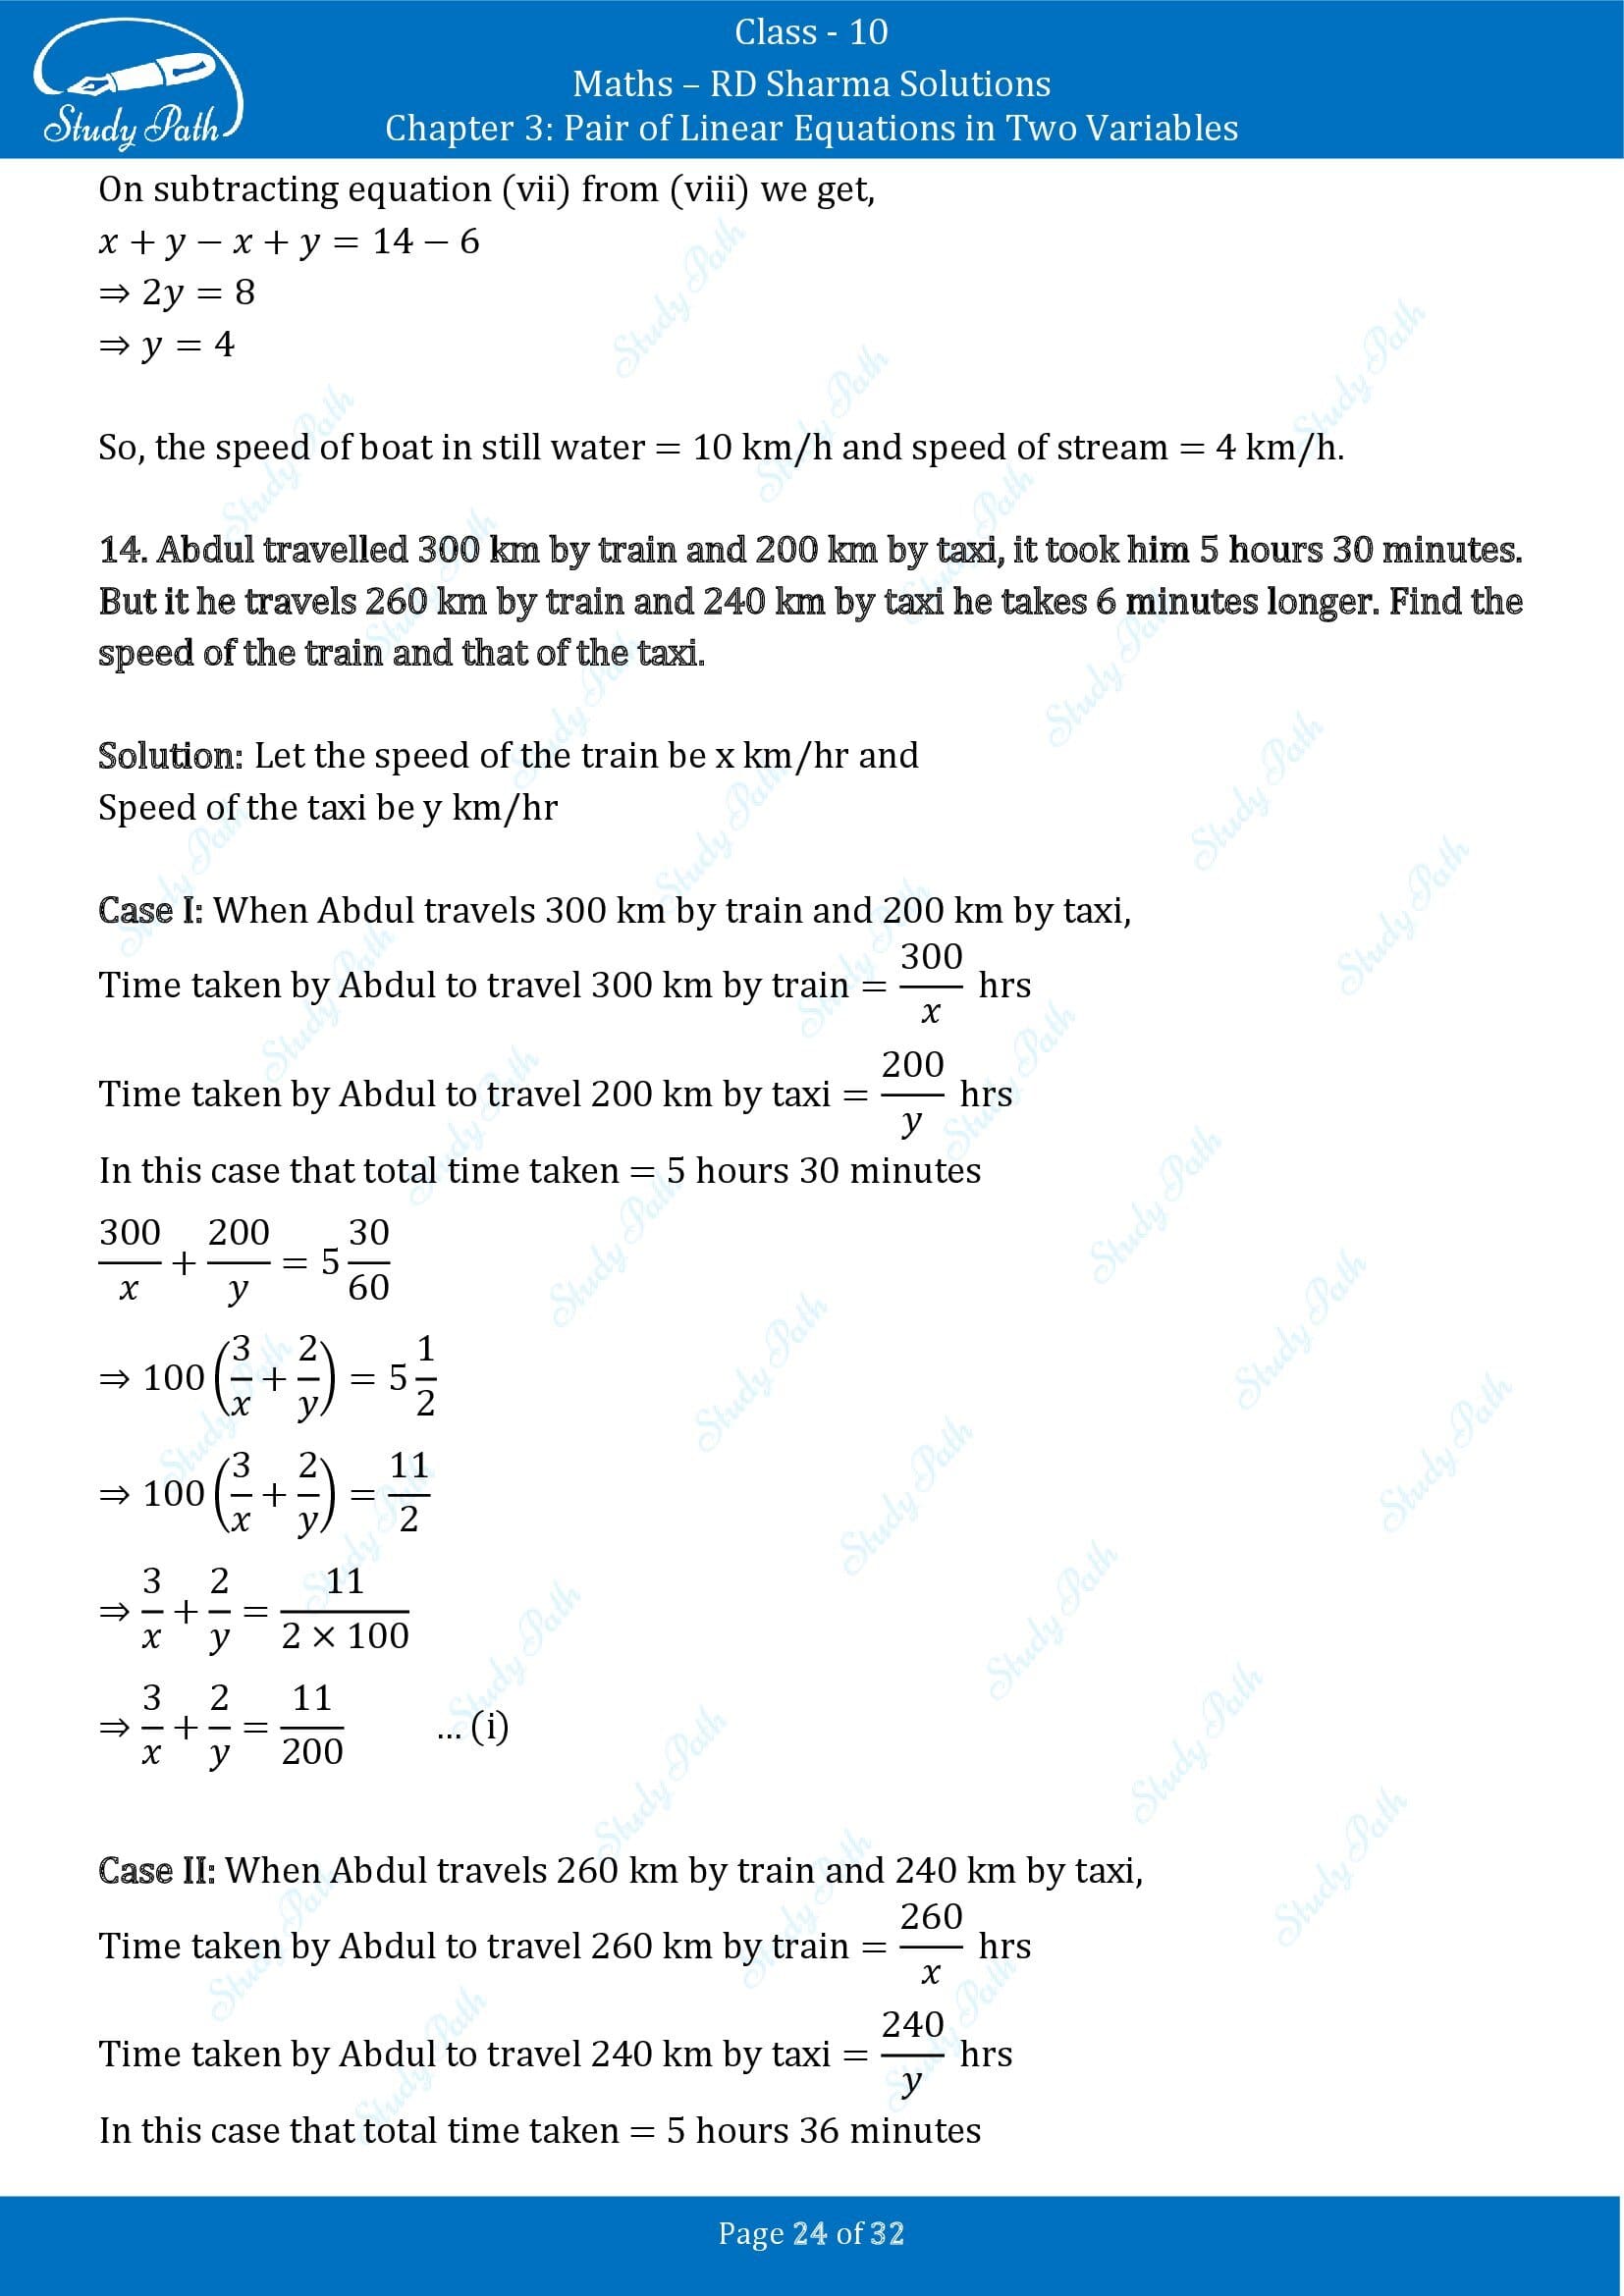 RD Sharma Solutions Class 10 Chapter 3 Pair of Linear Equations in Two Variables Exercise 3.10 00024